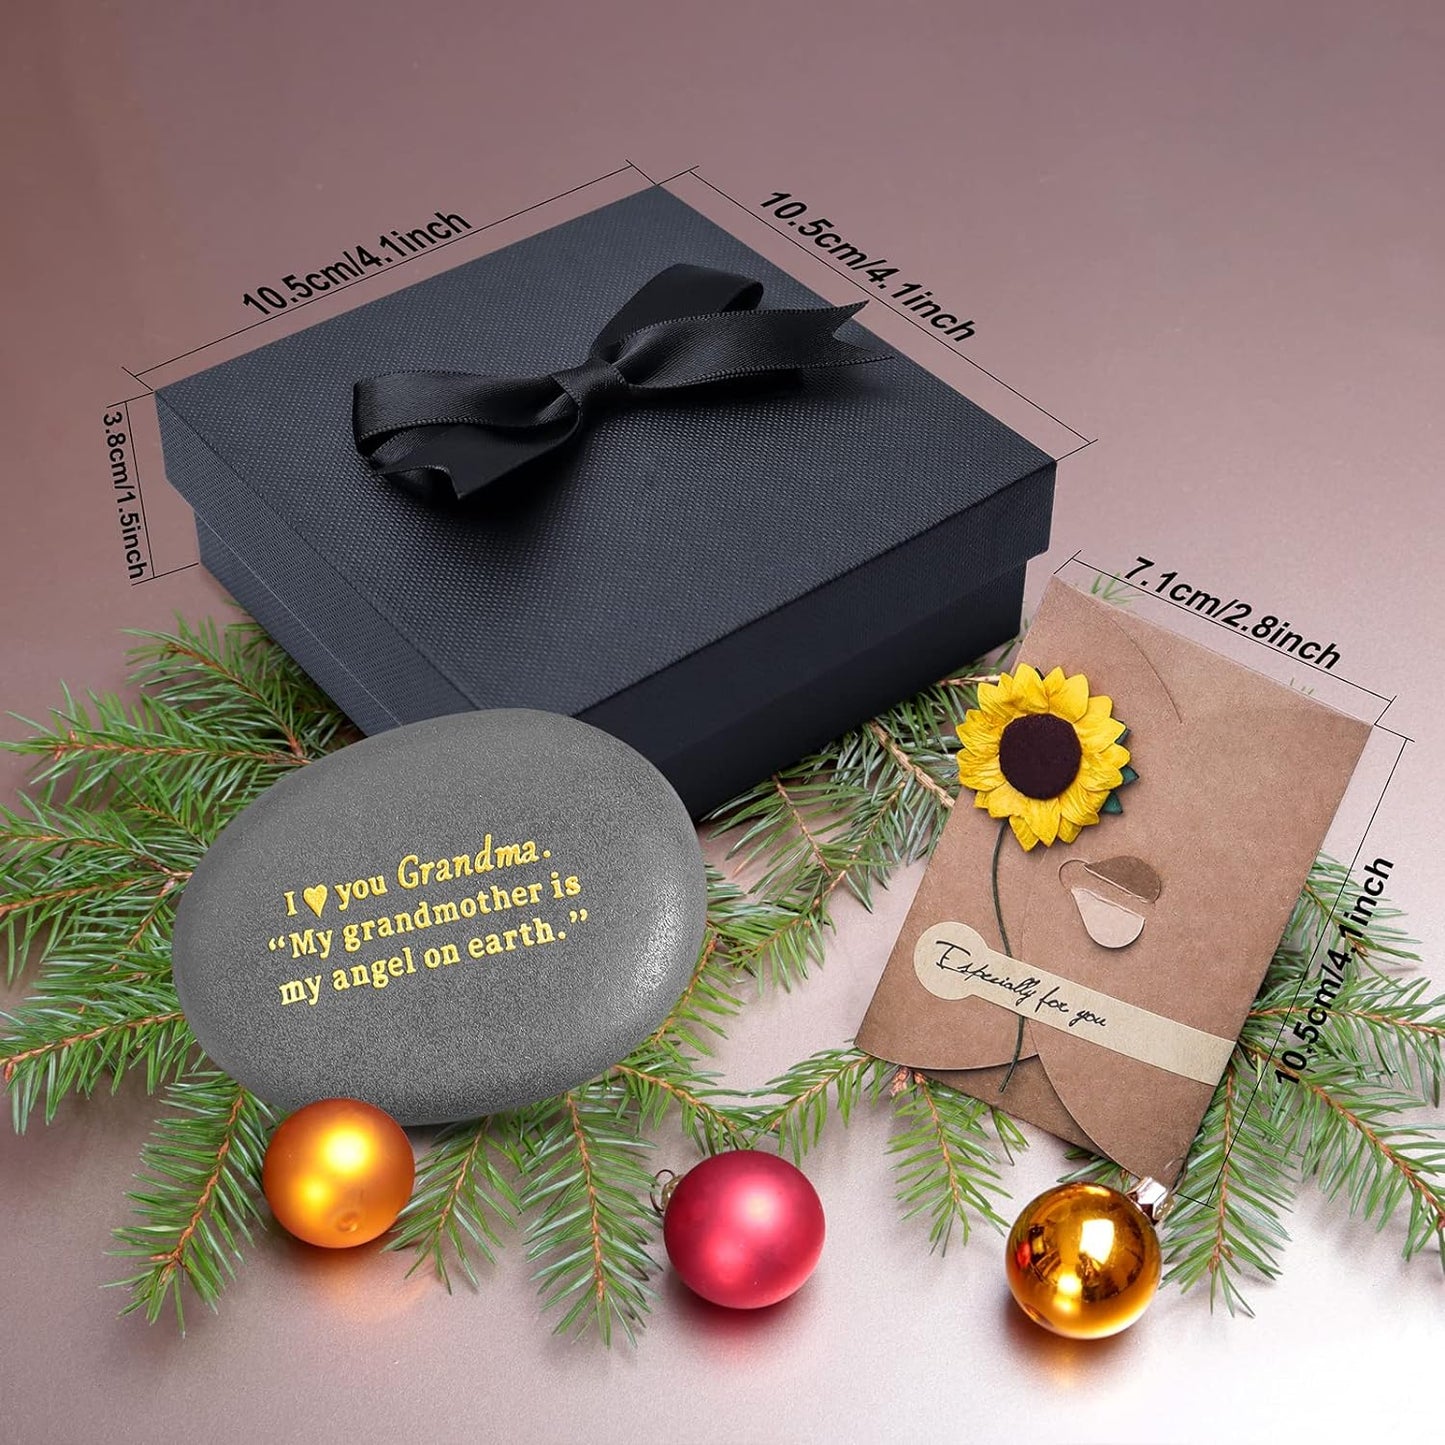 New Unique Keepsake Gift for Mom,Engraved Stone with Gift Box Christmas Mothers Day Birthday Gifts for Mother from Daughter Son Kids Engraved Natural Rock Gift with Love